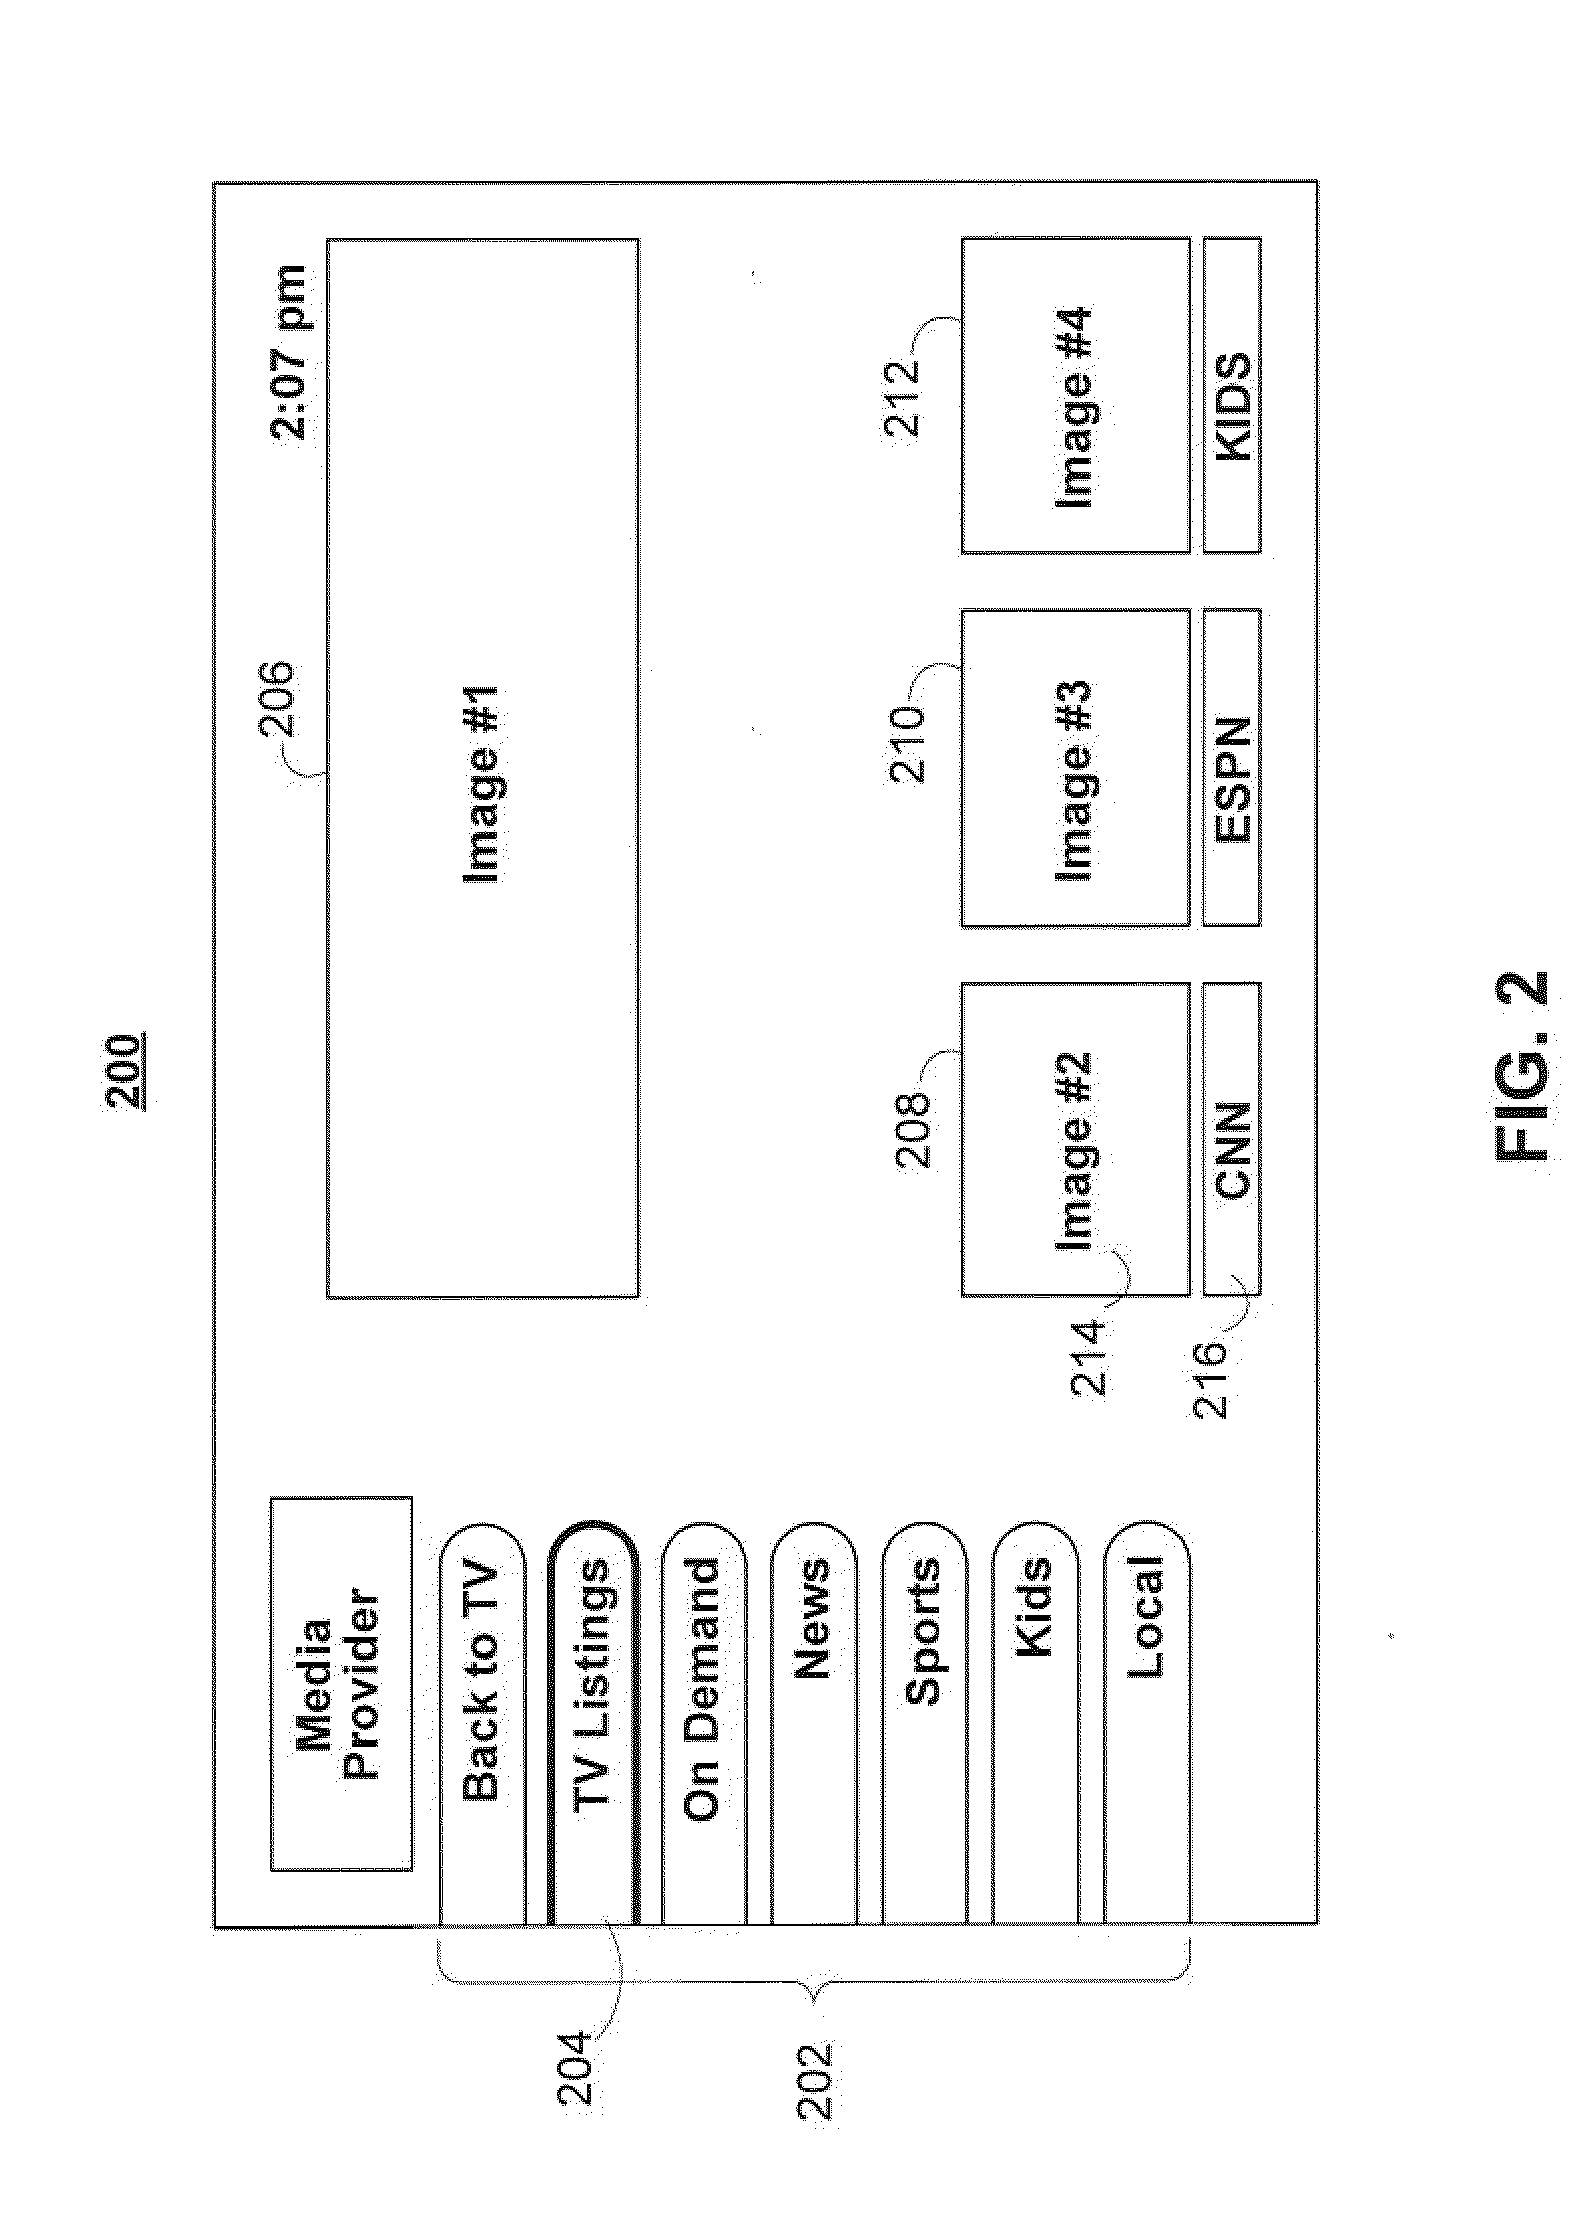 Systems and methods for providing automatic parental control activation when a restricted user is detected within range of a device